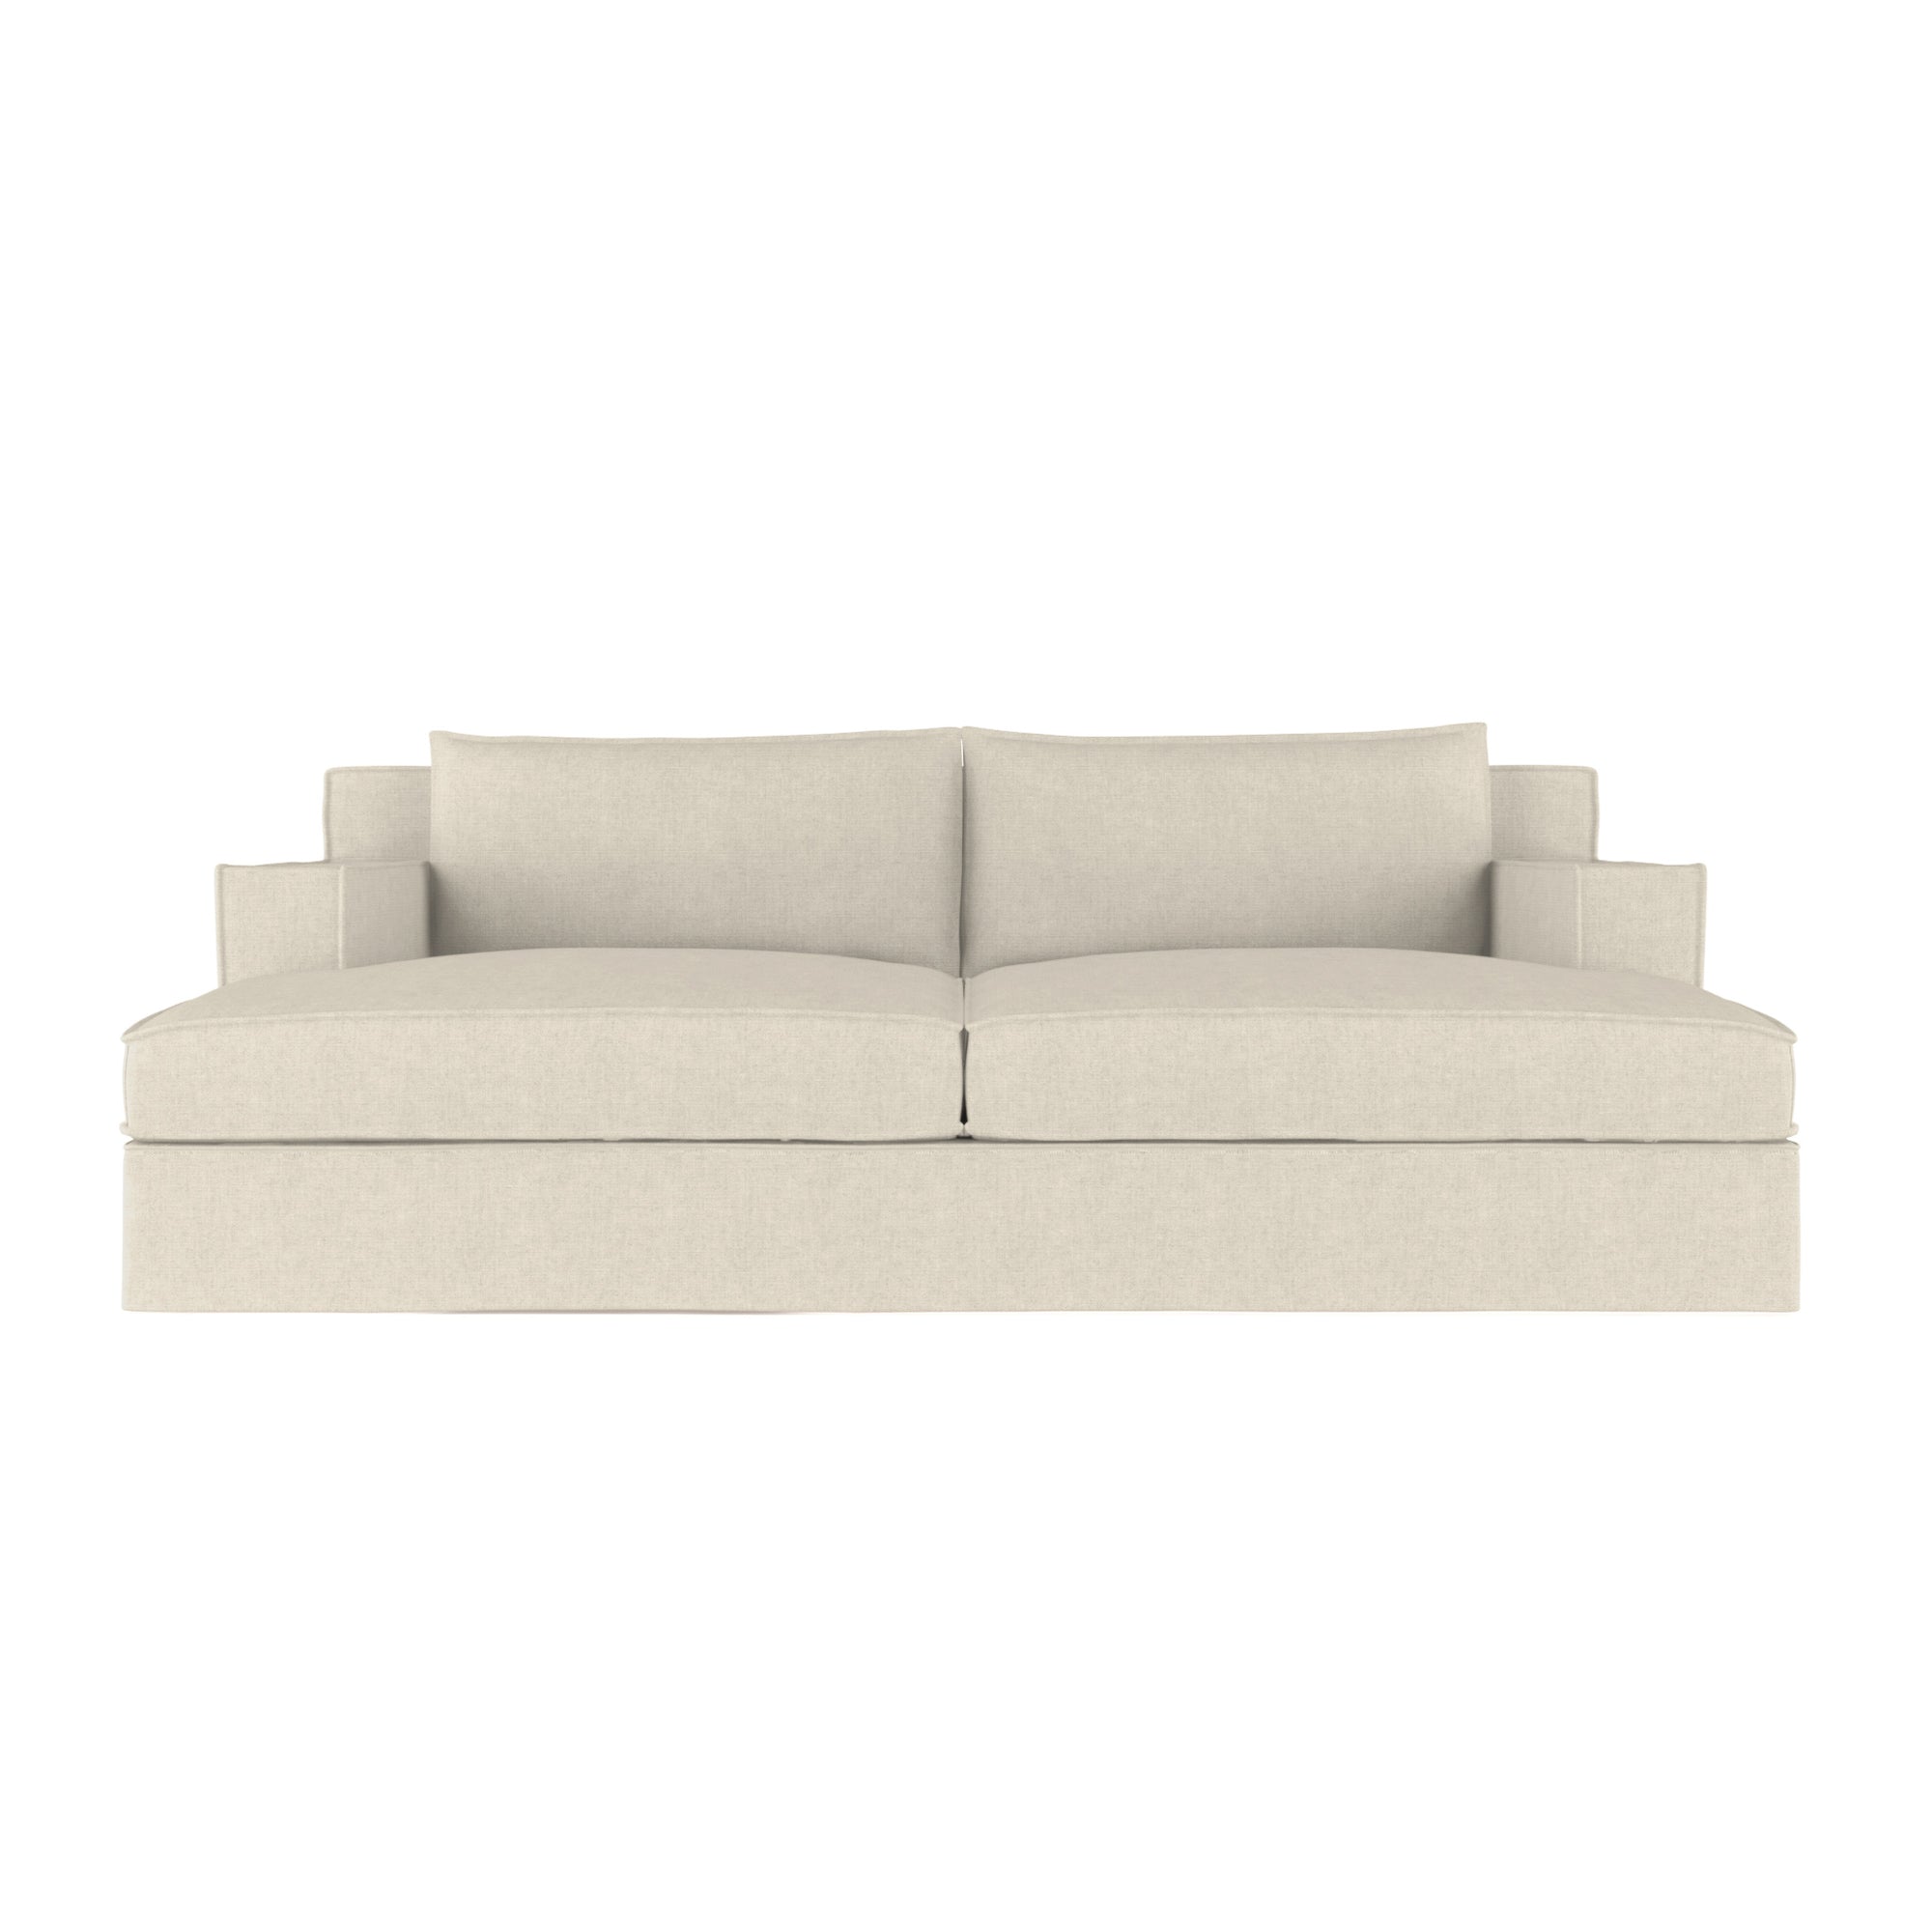 Mulberry Daybed - Oyster Box Weave Linen